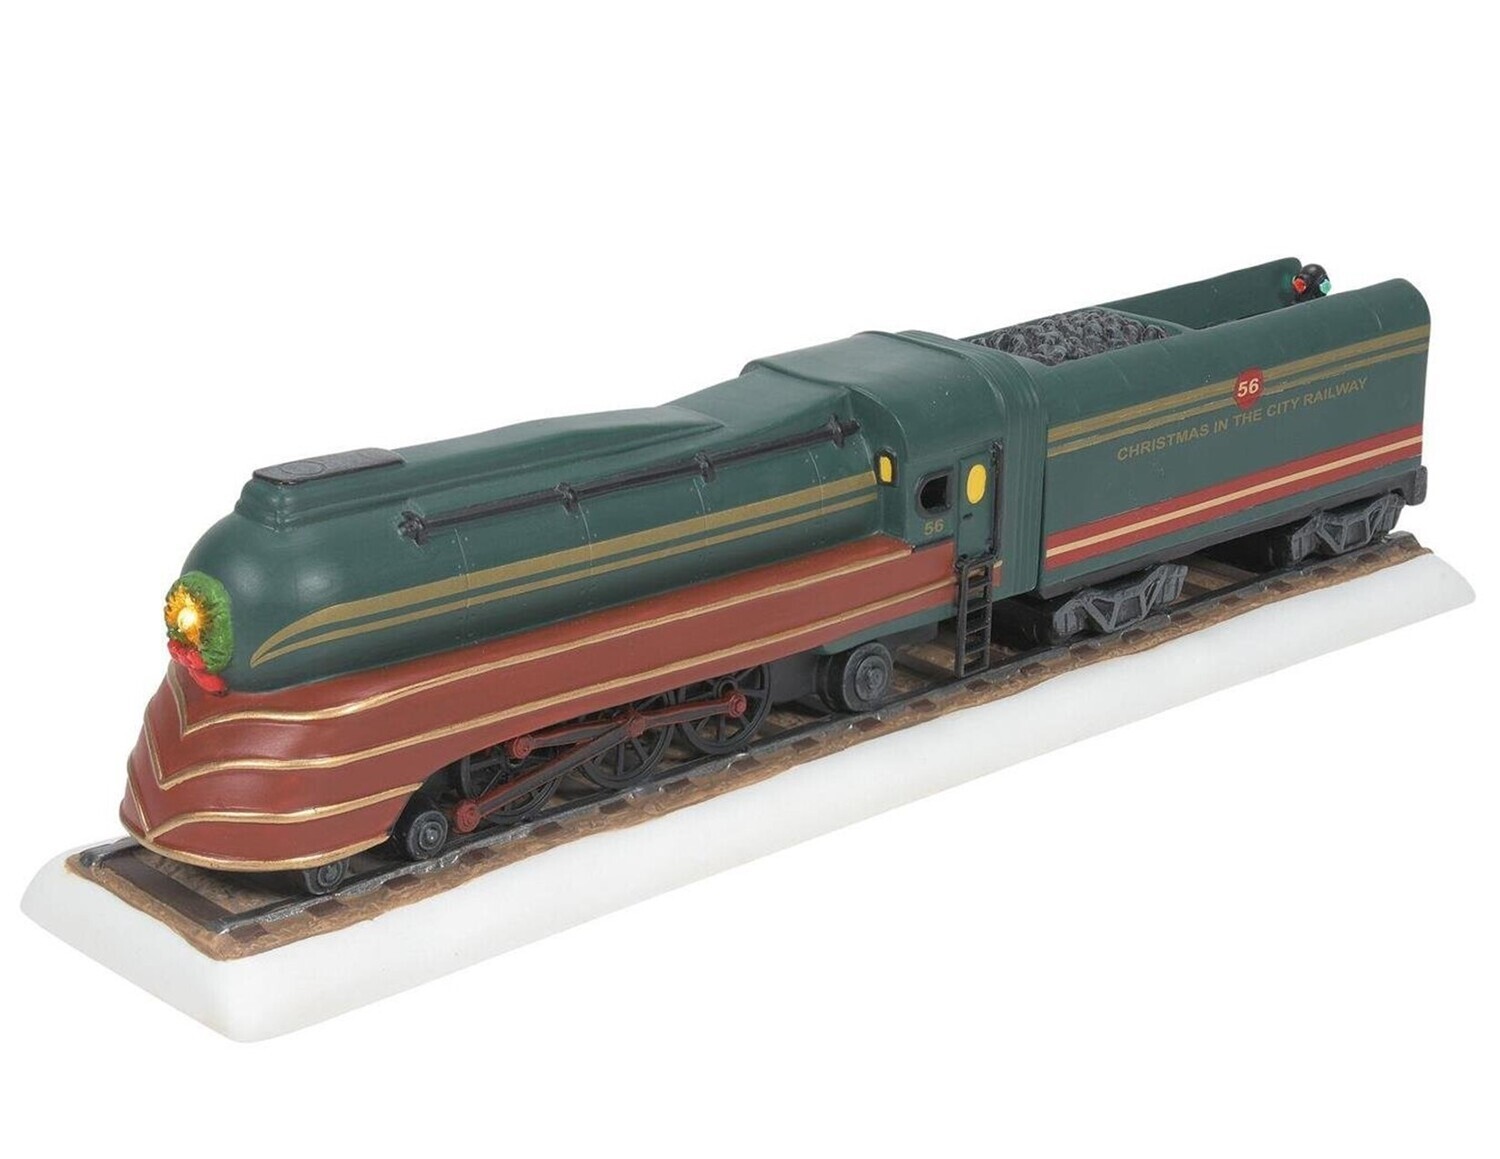 Department 56 Christmas in the City Village "Christmas in the Cities Limited" Train Figurine (6011380)